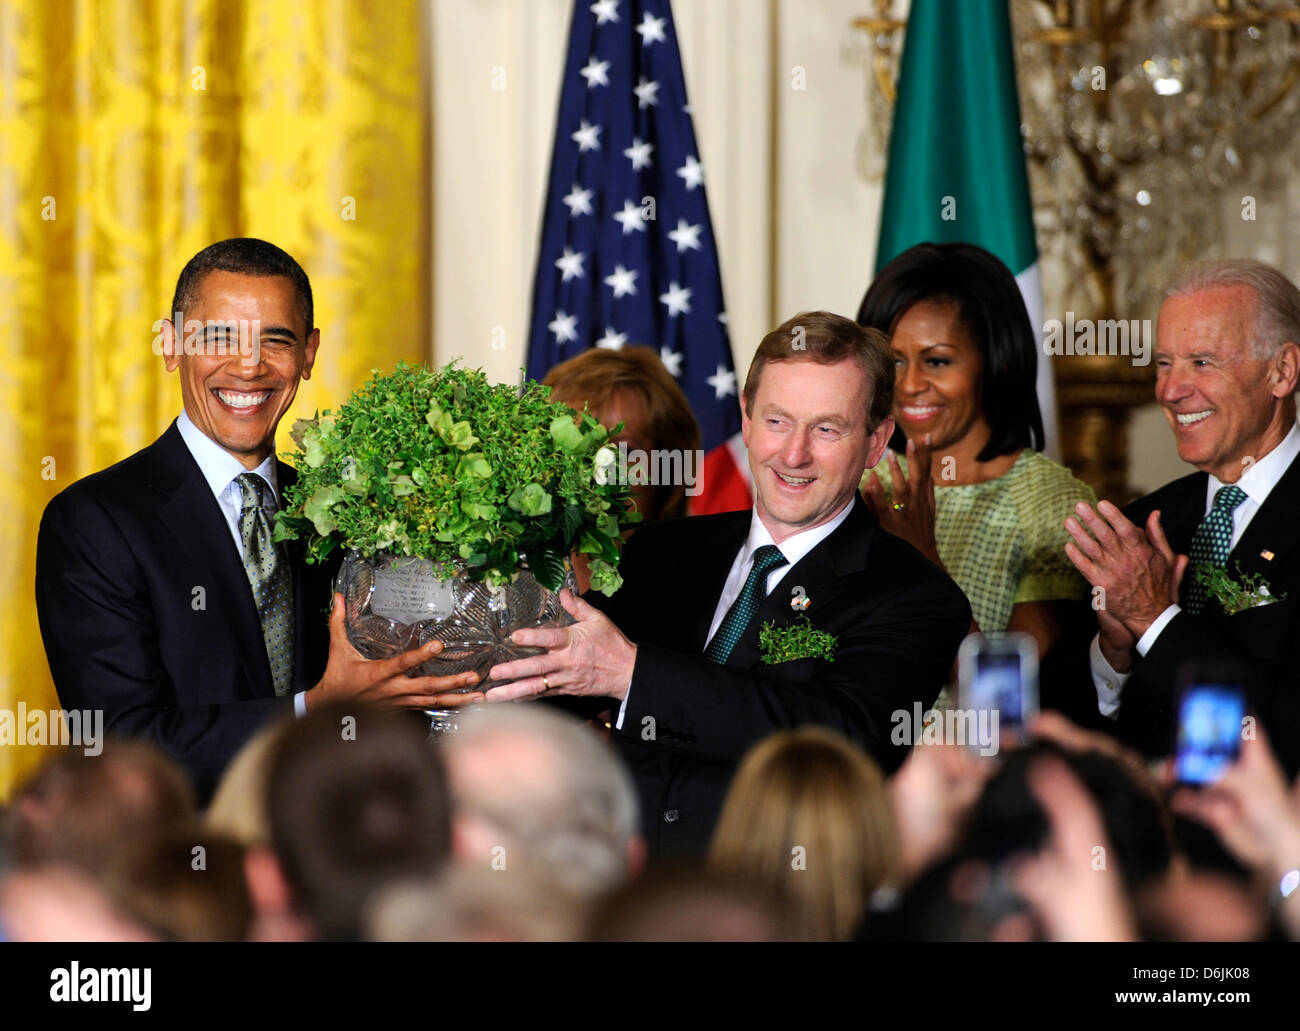 United States President Barack Obama (L) accepts a bowl of shamrocks from Irish Prime Minister Enda Kenny as first lady Michelle Obama (2nd,R) and Vice President Joe Biden (R) during a reception in the East Room of the White House, March 20, 2012, in Washington, DC. The two leaders concluded a working day devoted to discussions on economic matters, Ireland's peace keeping participa Stock Photo